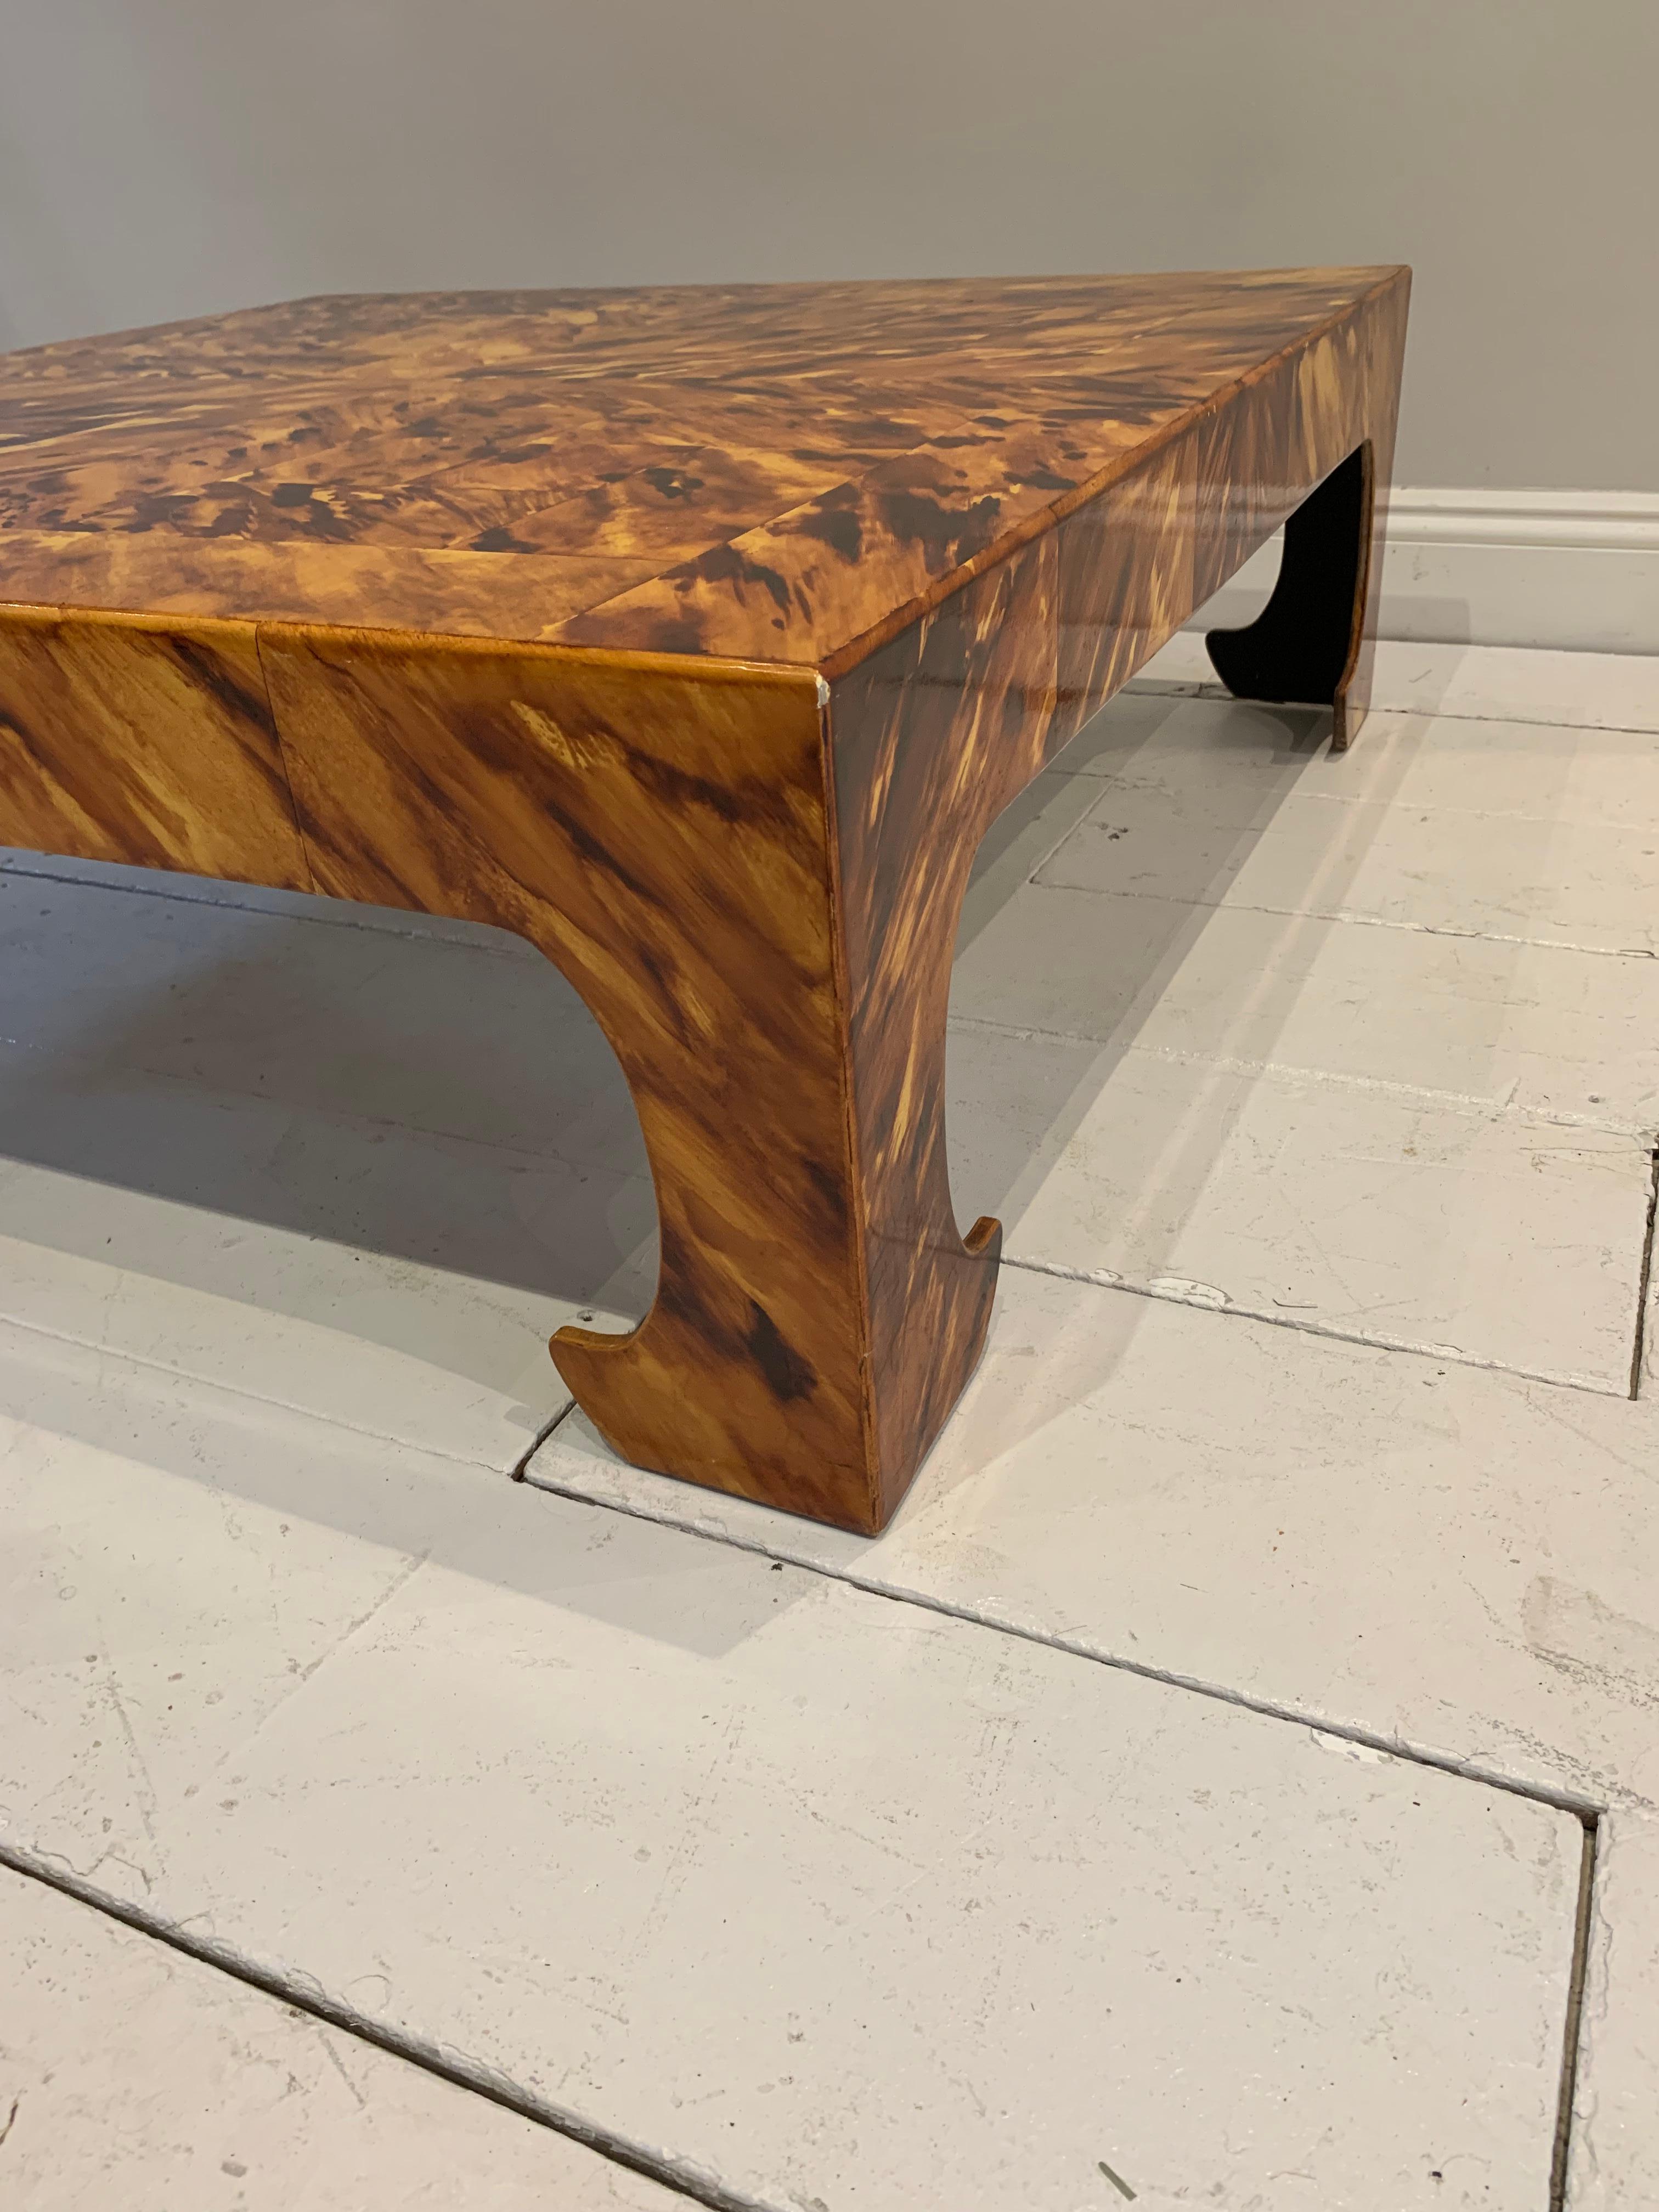 A good size and striking painted tortoiseshell coffee table in a Chinese style.
The table dates back to the 1970s and was likely to have been custom made at the time. A useful table which would work well in a contemporary or a more classic